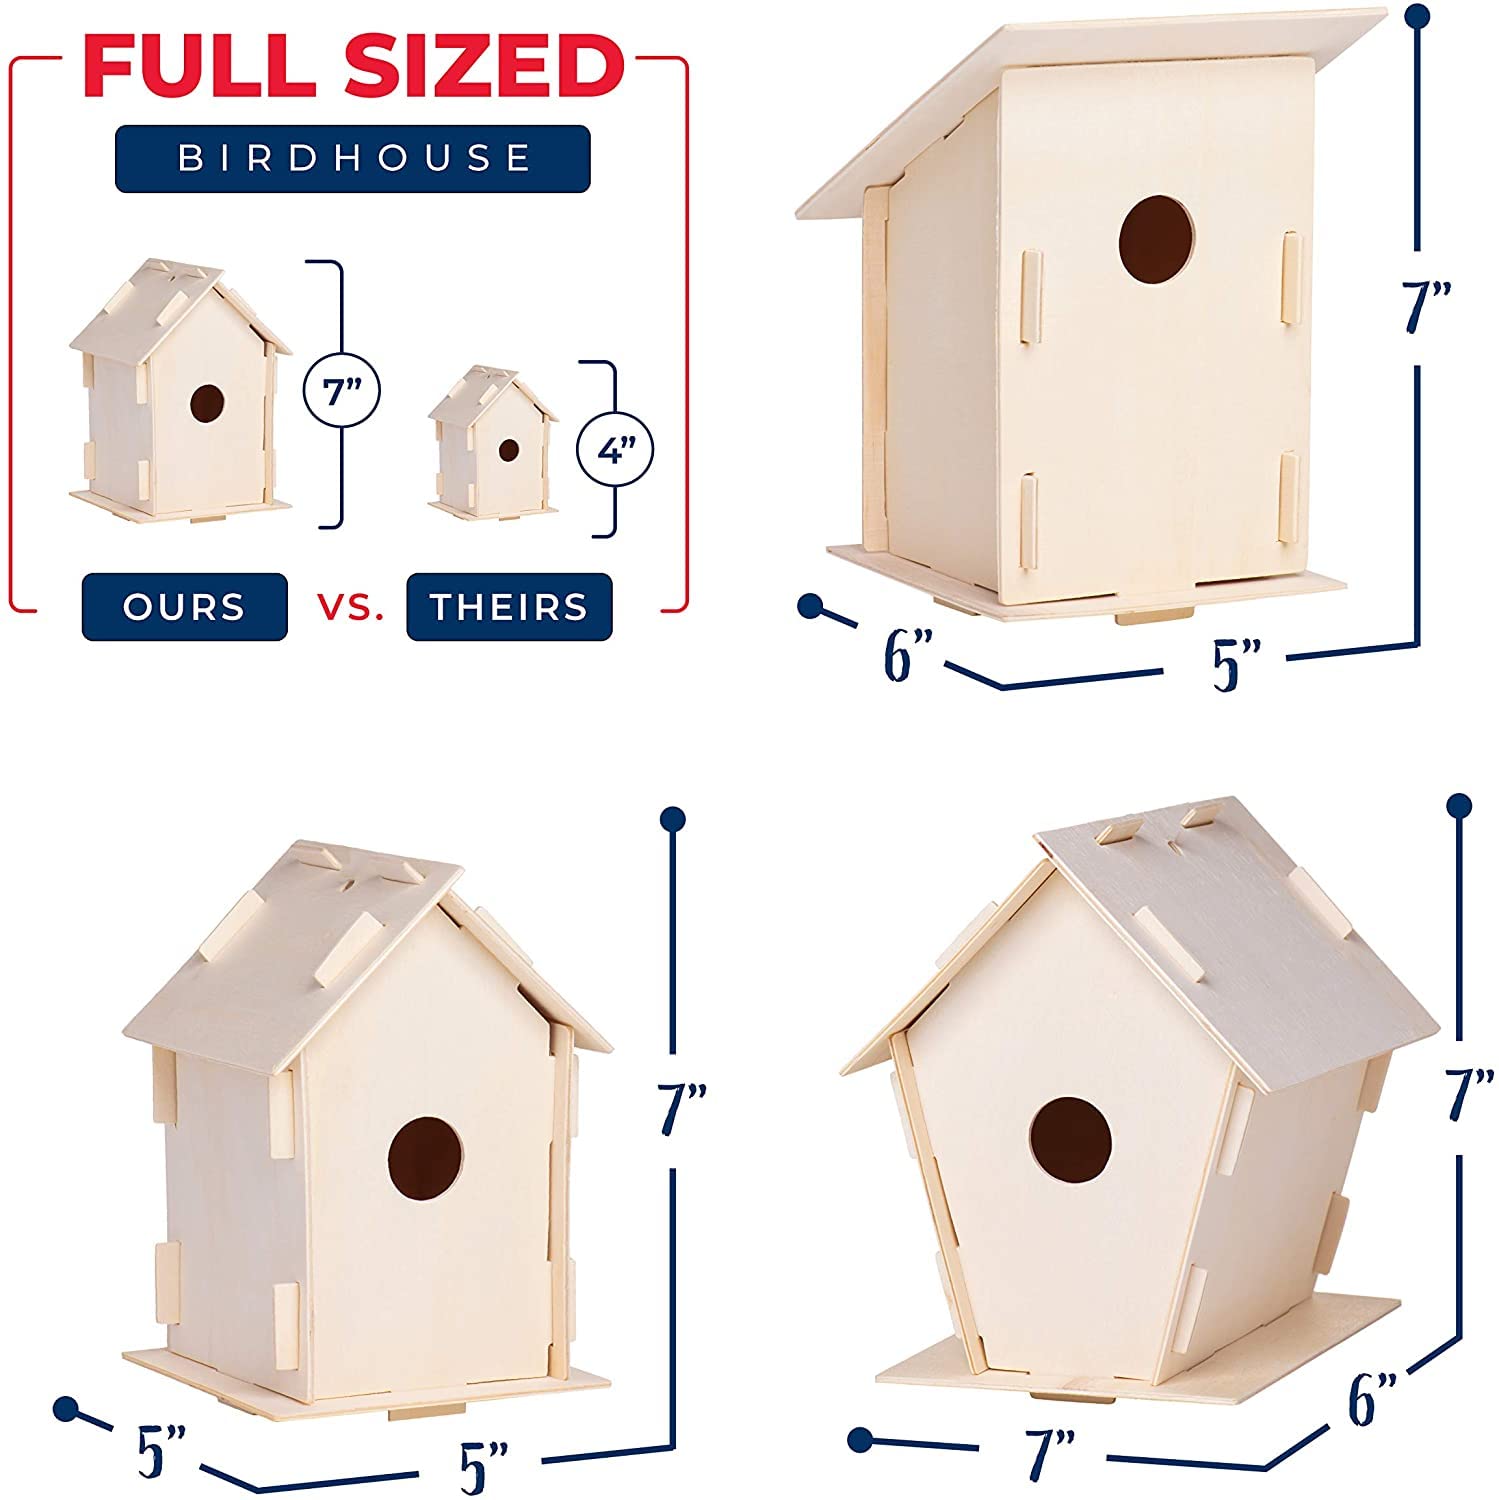 12 Wooden Birdhouses - Crafts for Girls and Boys - Kids Bulk Arts and Crafts Set - 12 DIY Unfinished Wood Birdhouse Kits, 12 Paint Strips, 12 Paintbrushes & Stickers for Children to Build & Paint